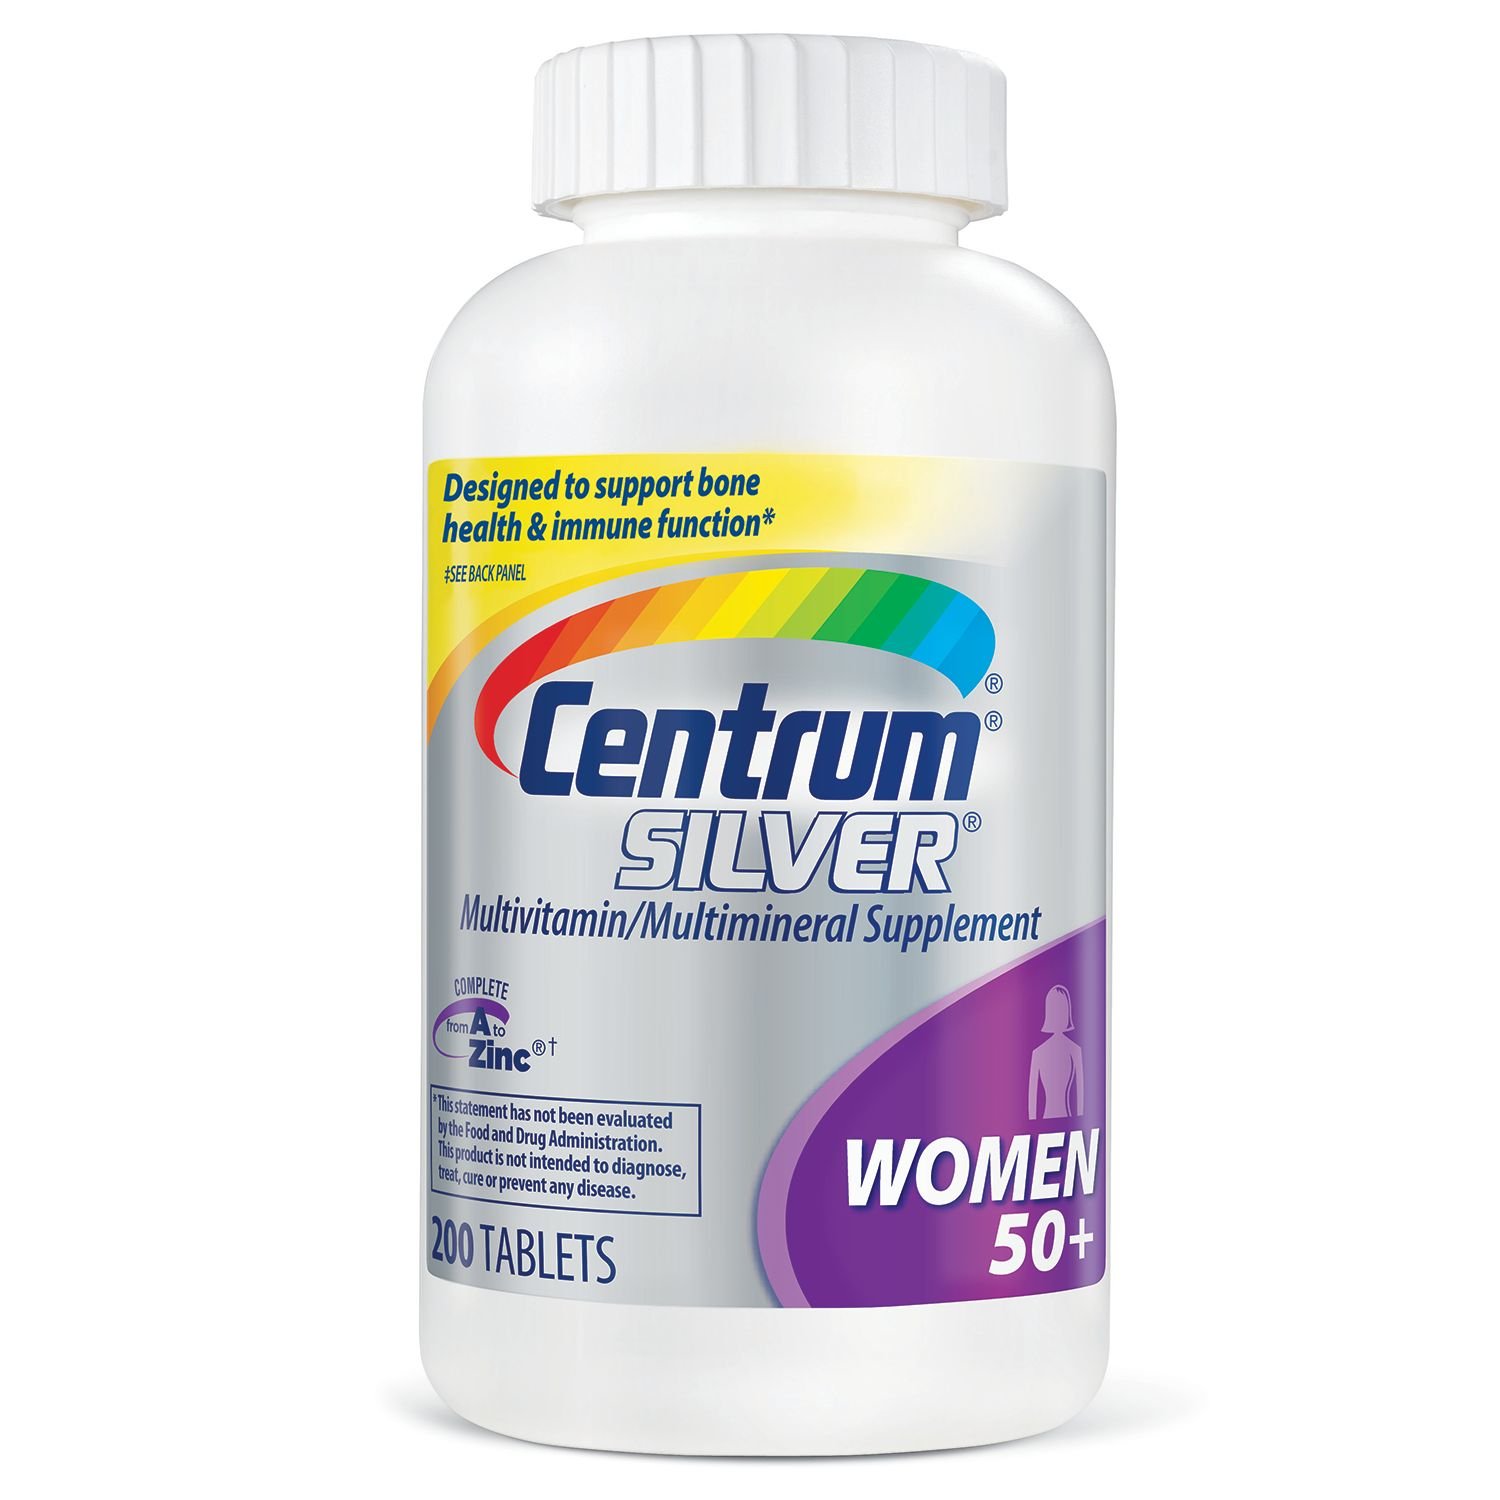 CSC 17 - Centrum Silver Multivitamin Multimineral Supplement Complete From a to Zinc for Women 50+ (250 Tablets)